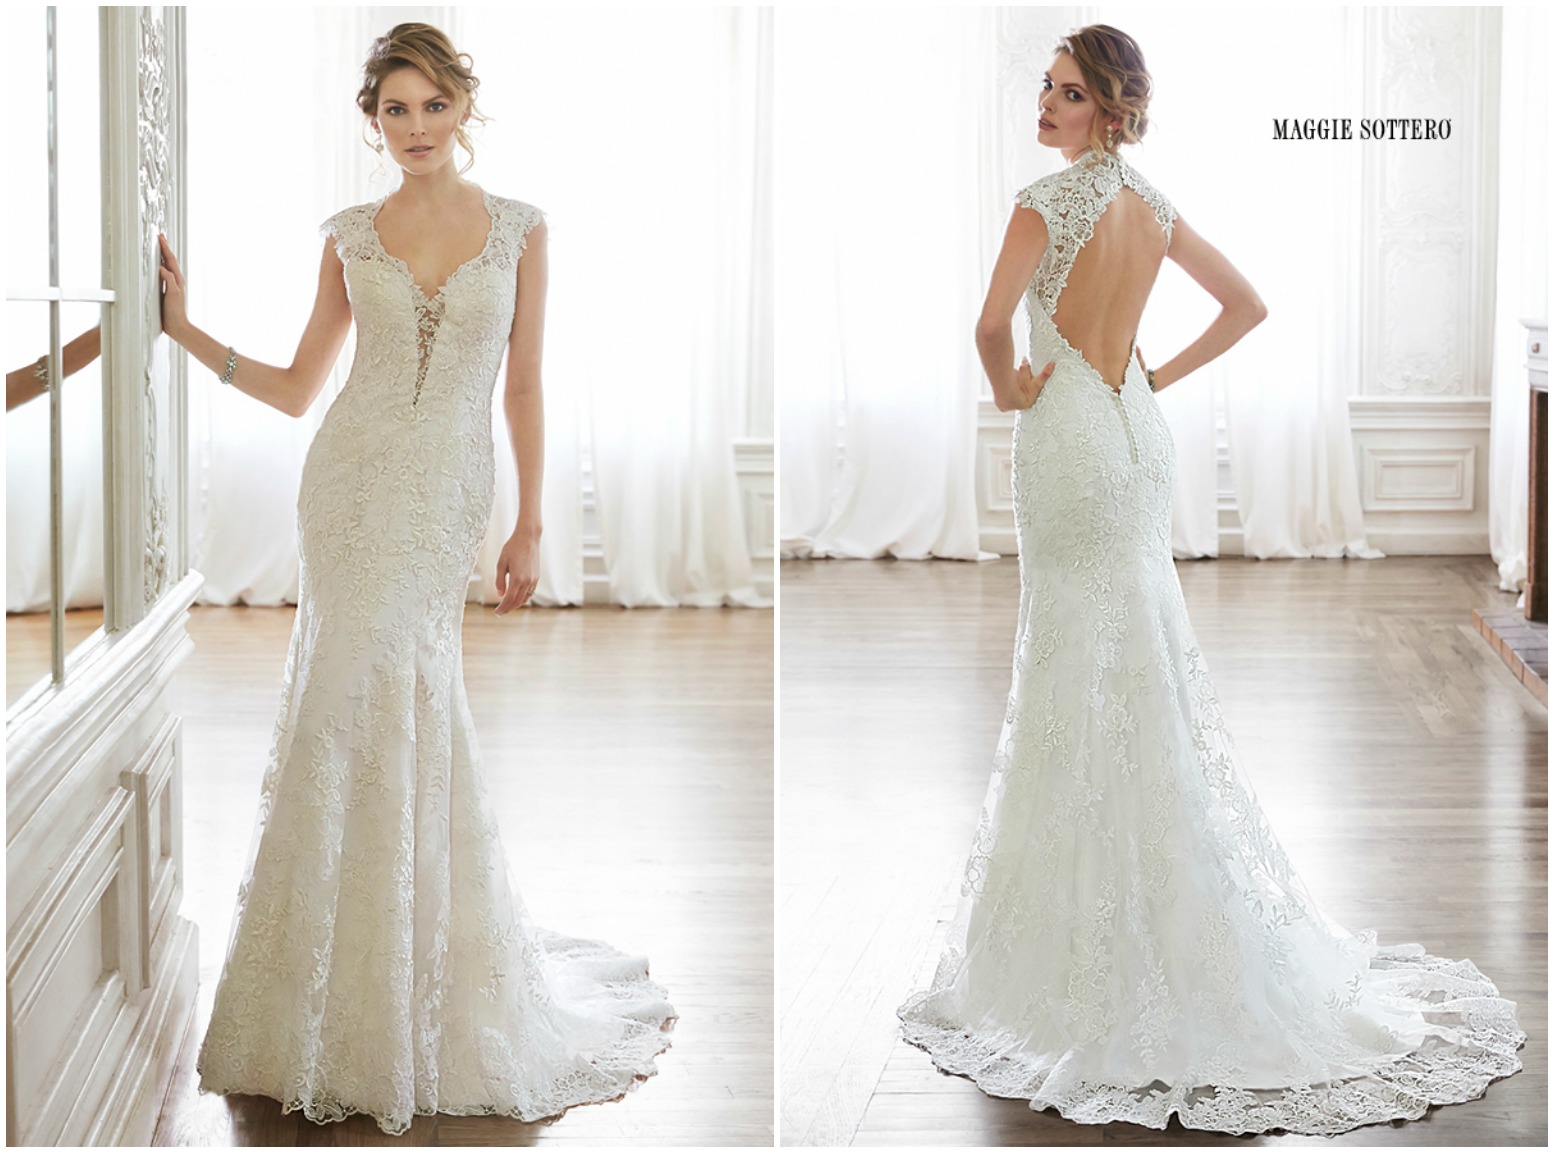 <a href="http://www.maggiesottero.com/dress.aspx?style=5MC152&amp;page=0&amp;pageSize=36&amp;keywordText=&amp;keywordType=All" target="_blank">Maggie Sottero</a>